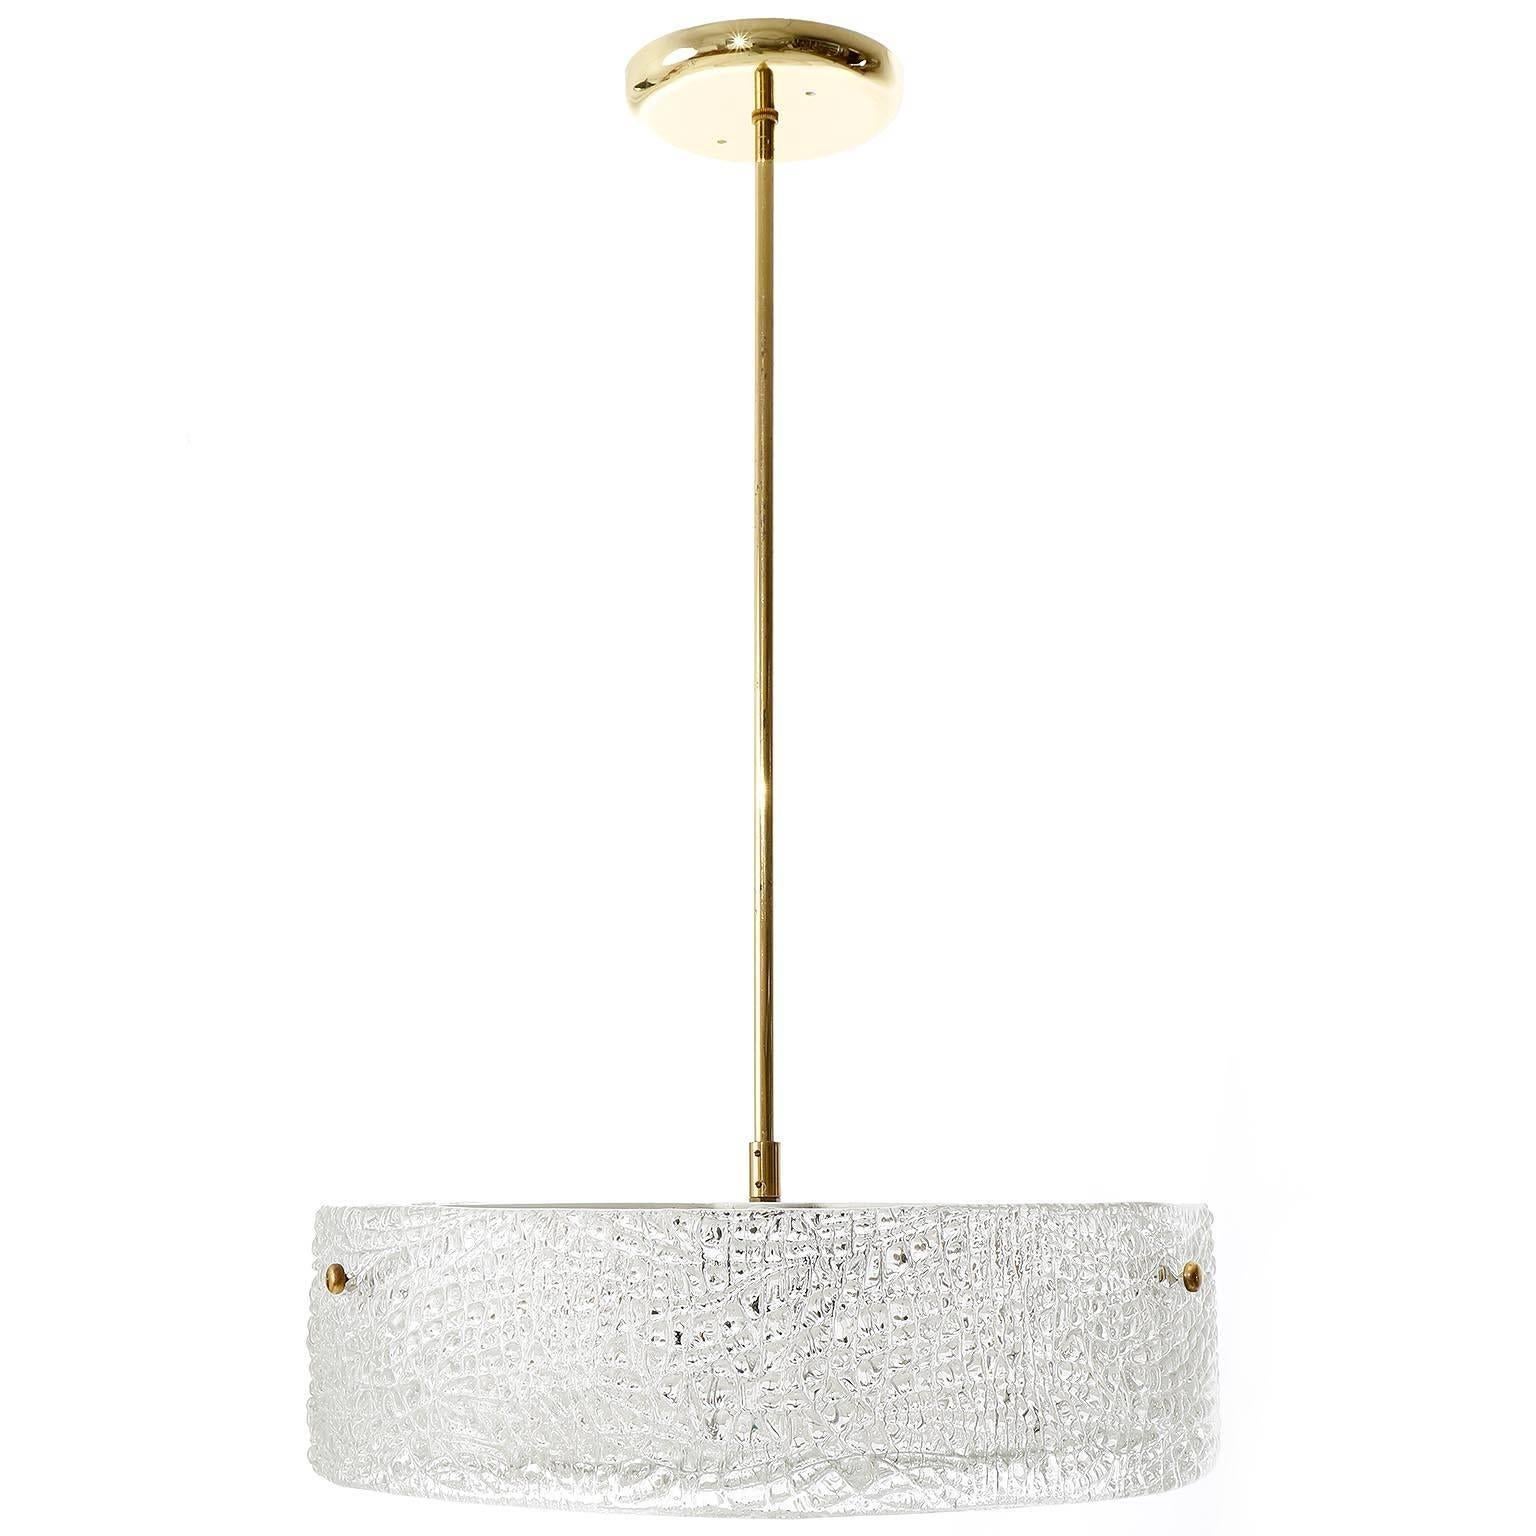 A beautiful textured glass and brass light fixture by J.T. Kalmar, Vienna, manufactured in midcentury, circa 1960 (late 1950s or early 1960s).
A round glass ring is mounted with three brass bolts on a white painted metal frame. A textured glass disc